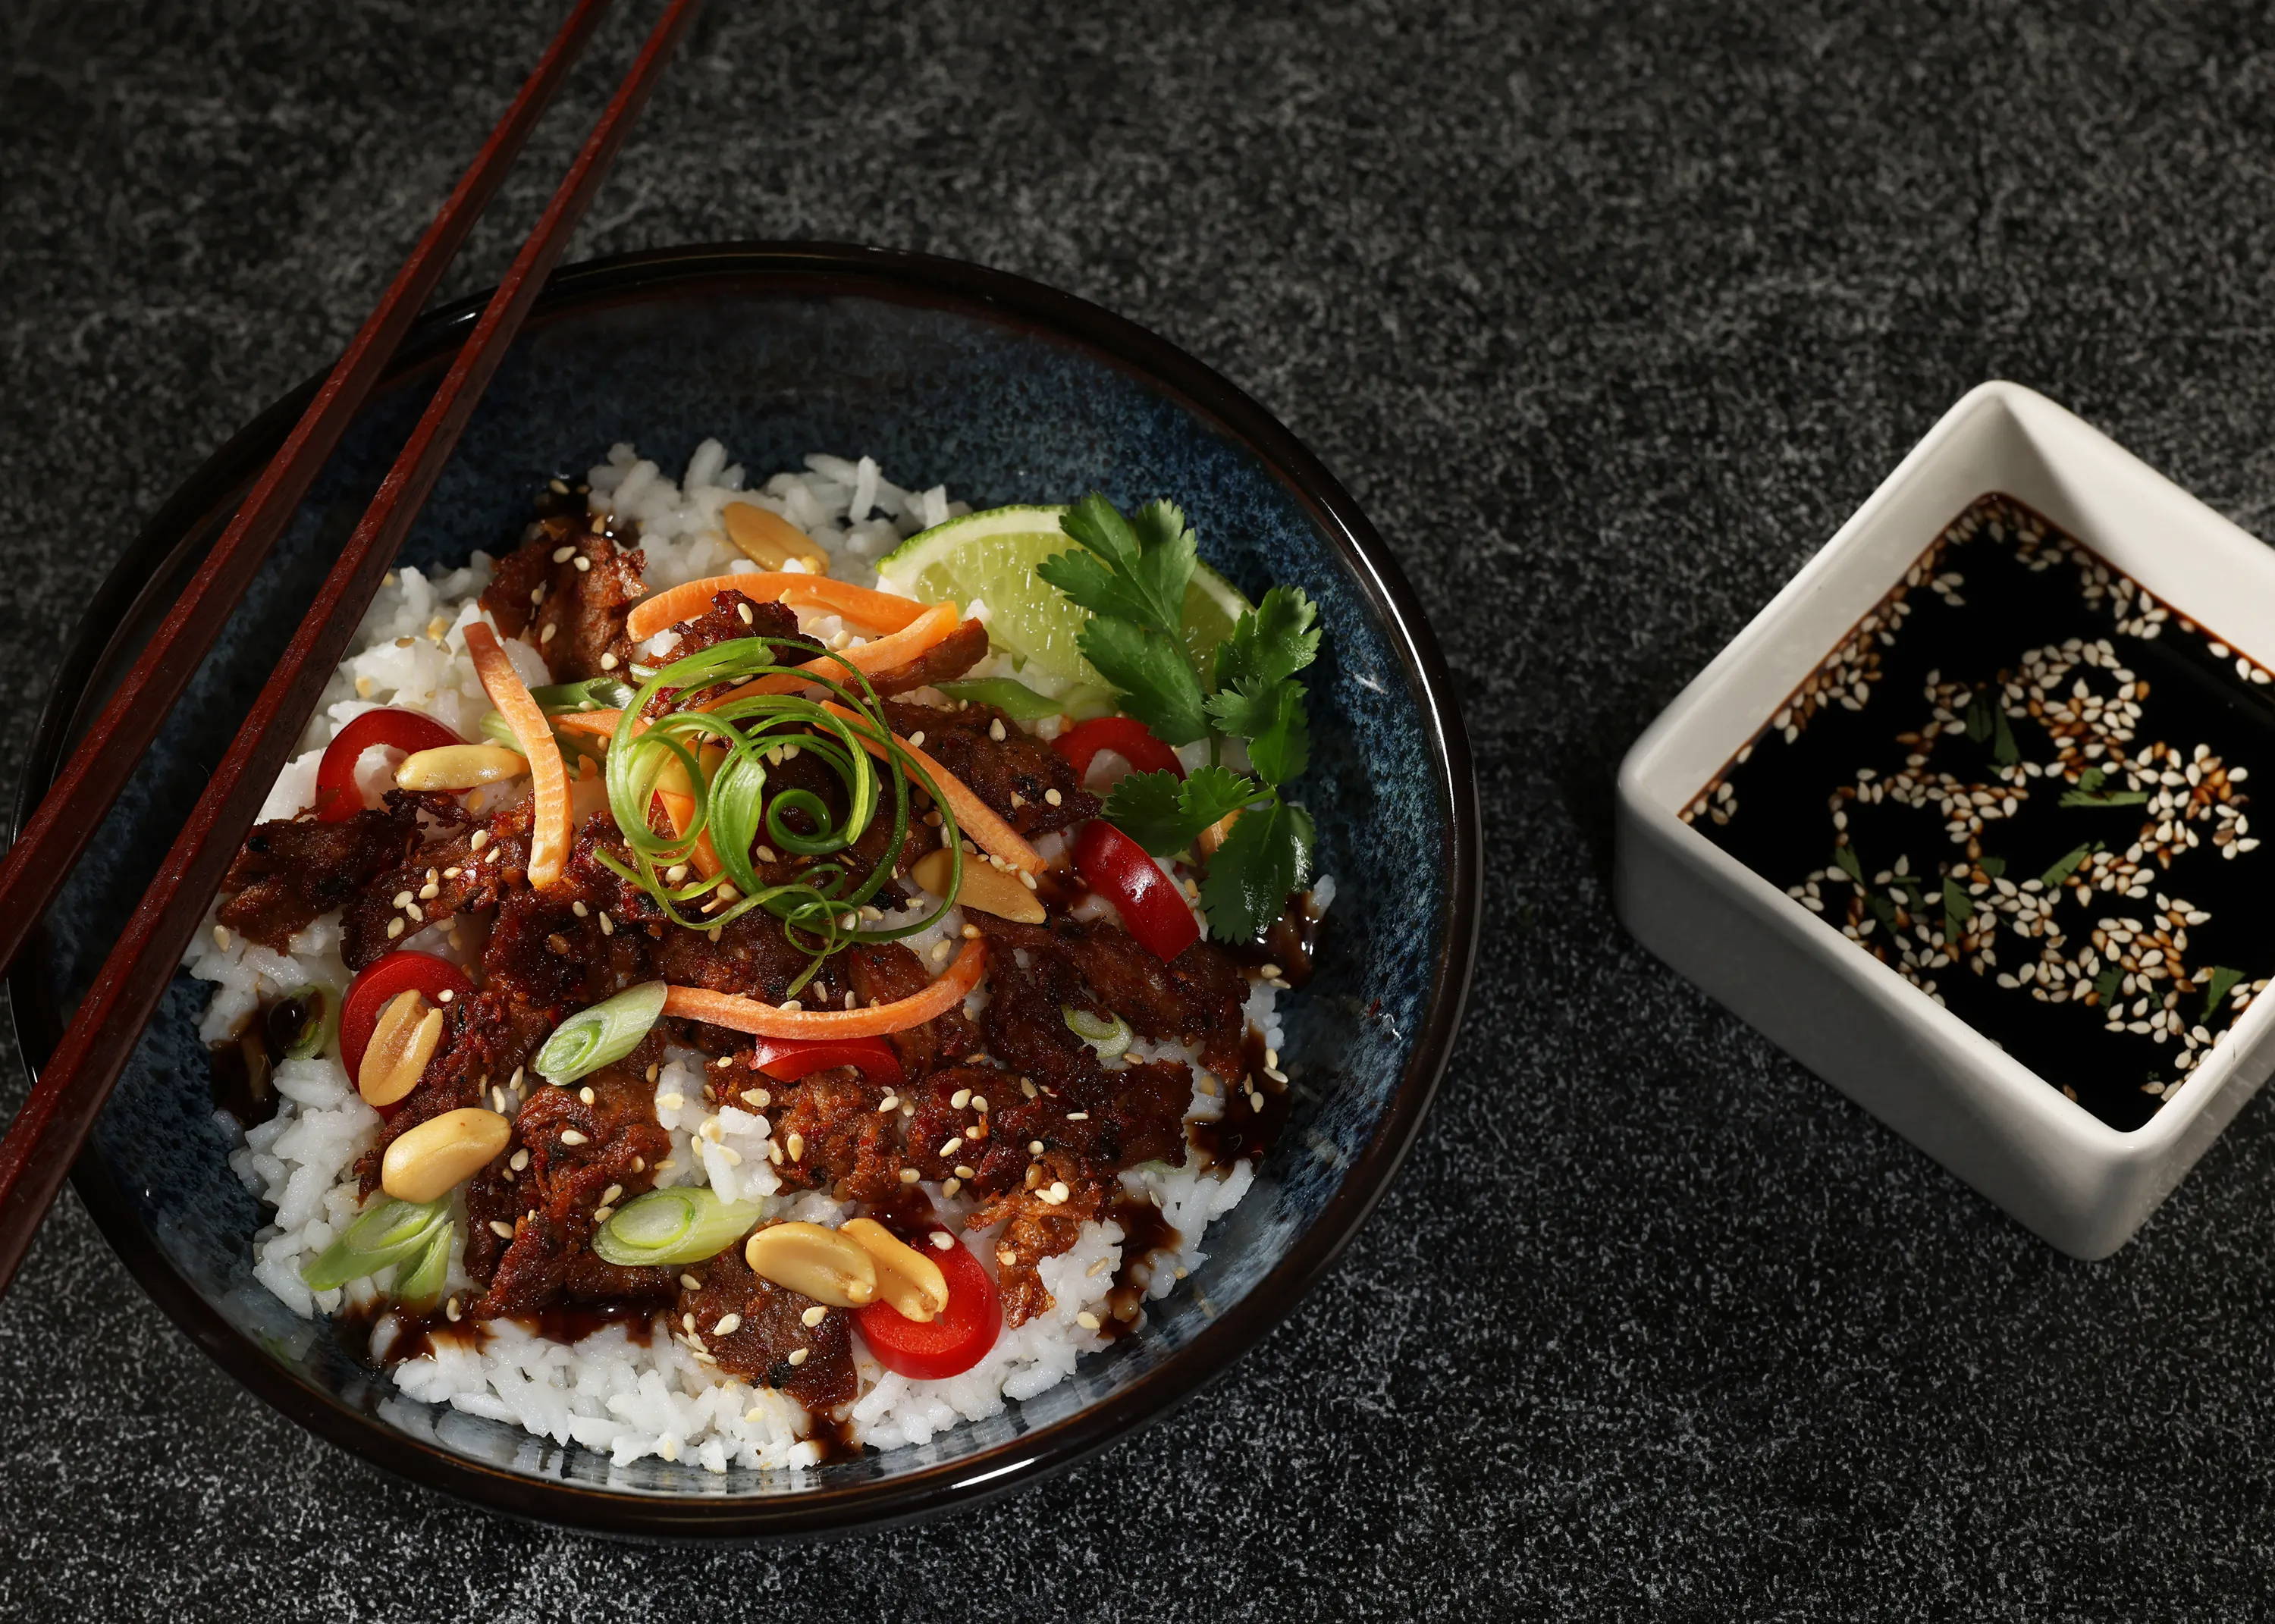 Harvest Shreds spiced with Bulgogi Blend on a bed of rice, with red peppers, scallions, peanuts, carrots and sesame seeds. In a large dark bowl with chopsticks and a square white ramekin with soy sauce and sesame seeds